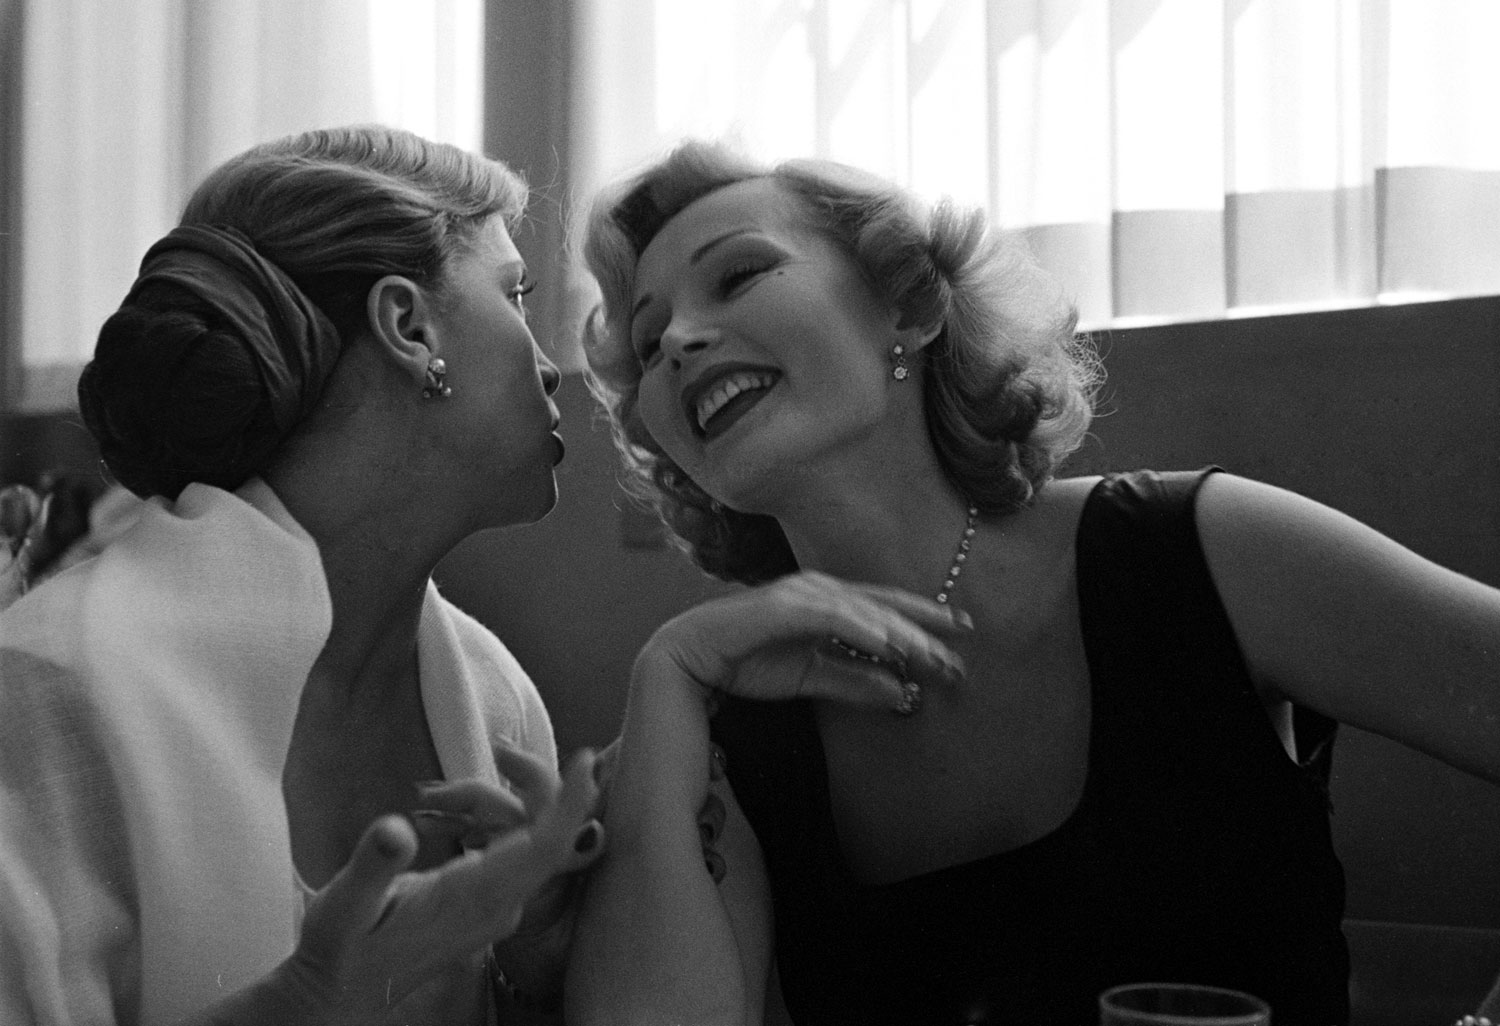 Zsa Zsa Gabor at lunch with French actress Denise Darcel, California, 1951.